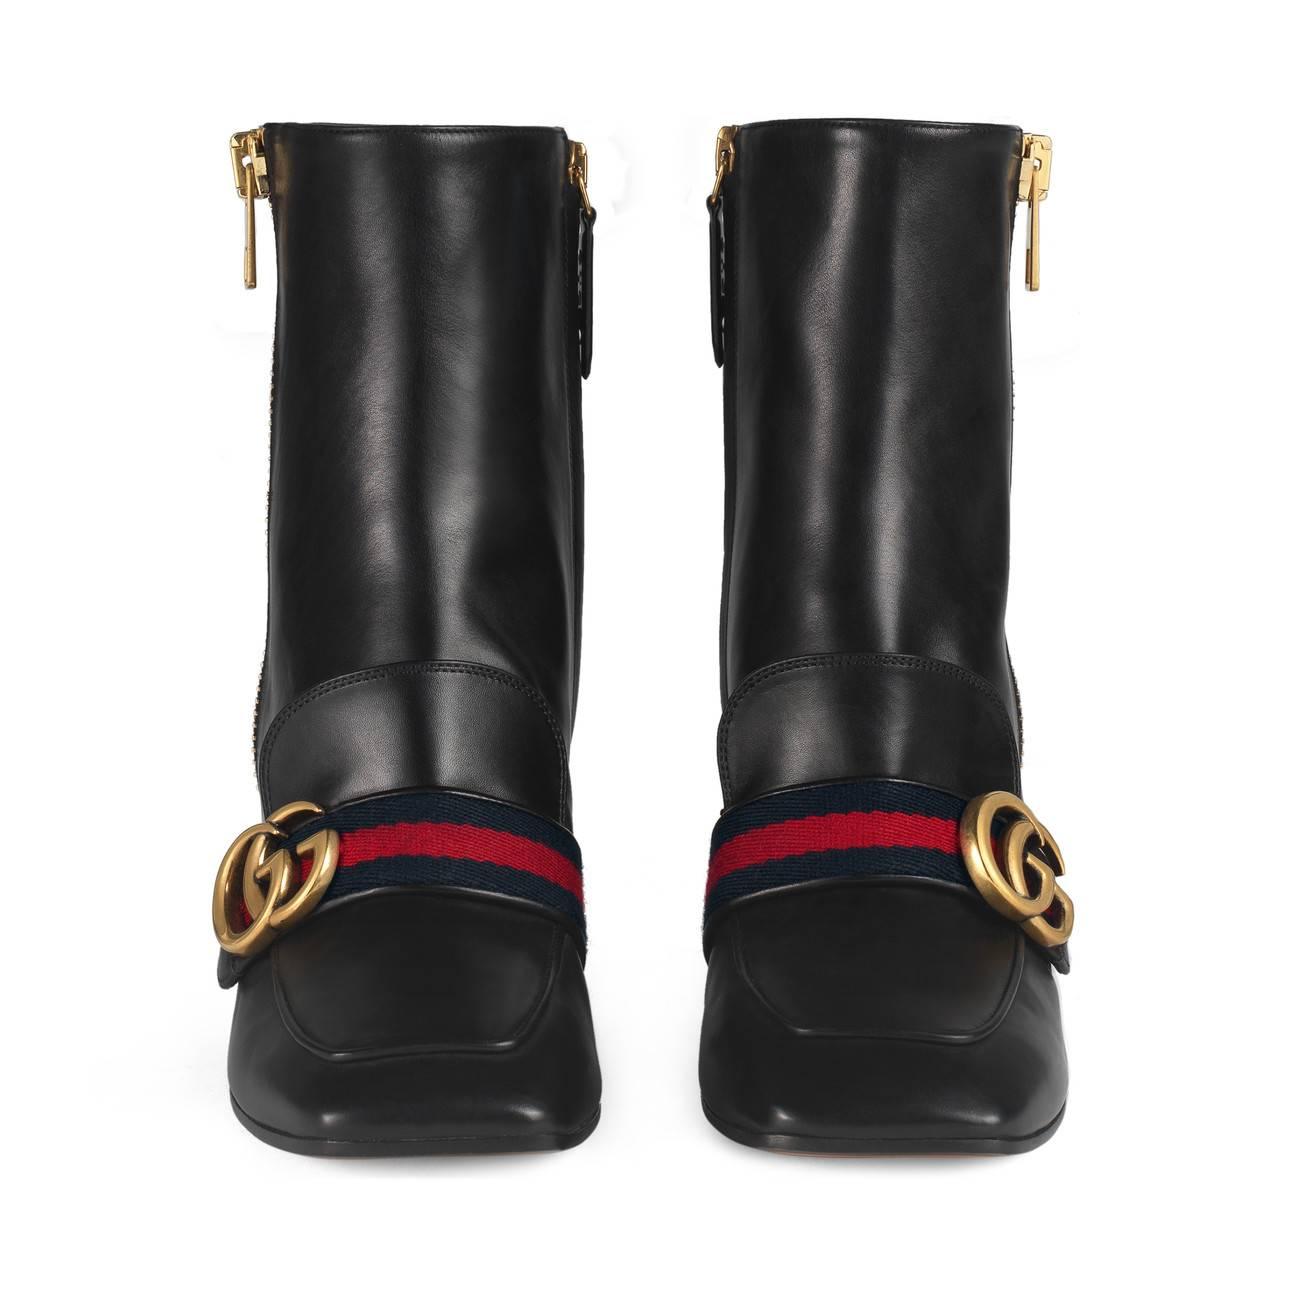 Gucci Leather Midheel Ankle Boot in Black Leather (Black